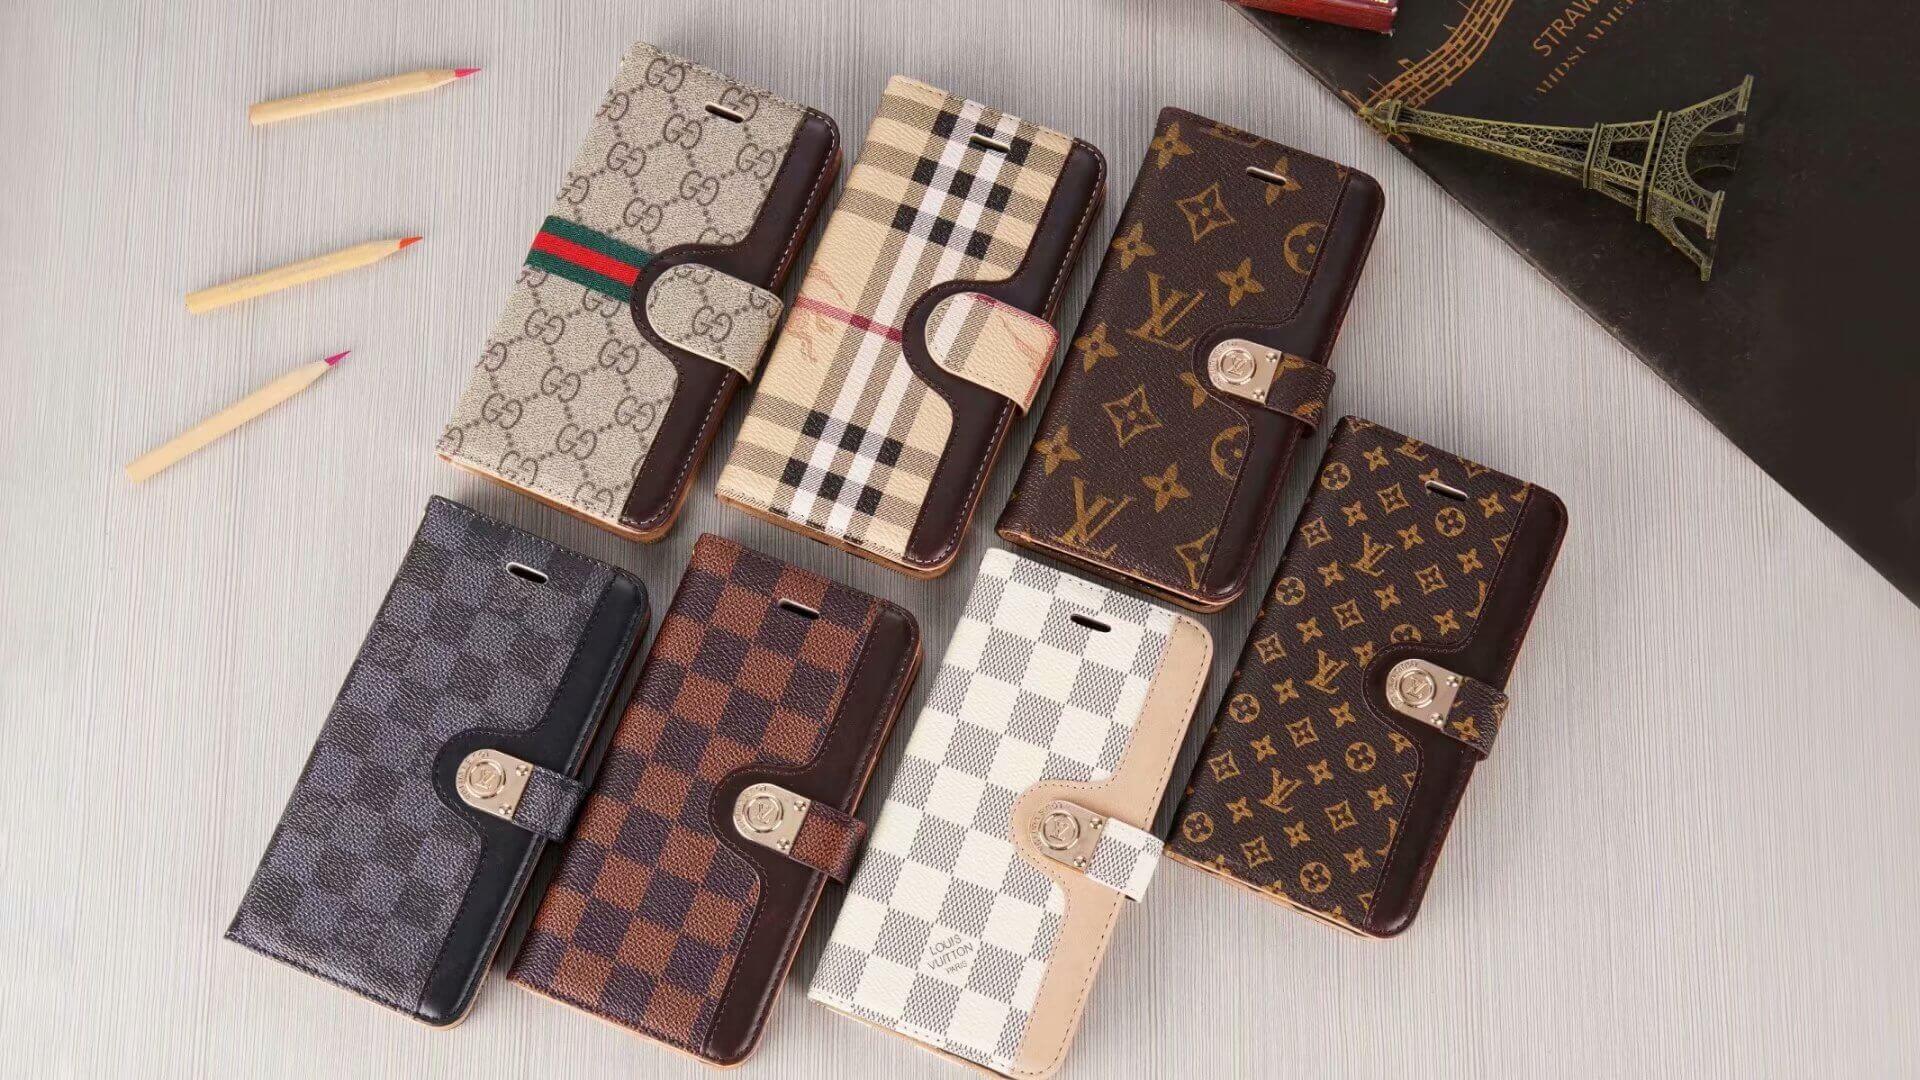 Louis Vuitton Cover Case For Samsung Galaxy S22 Ultra Plus S21 Ultra Plus